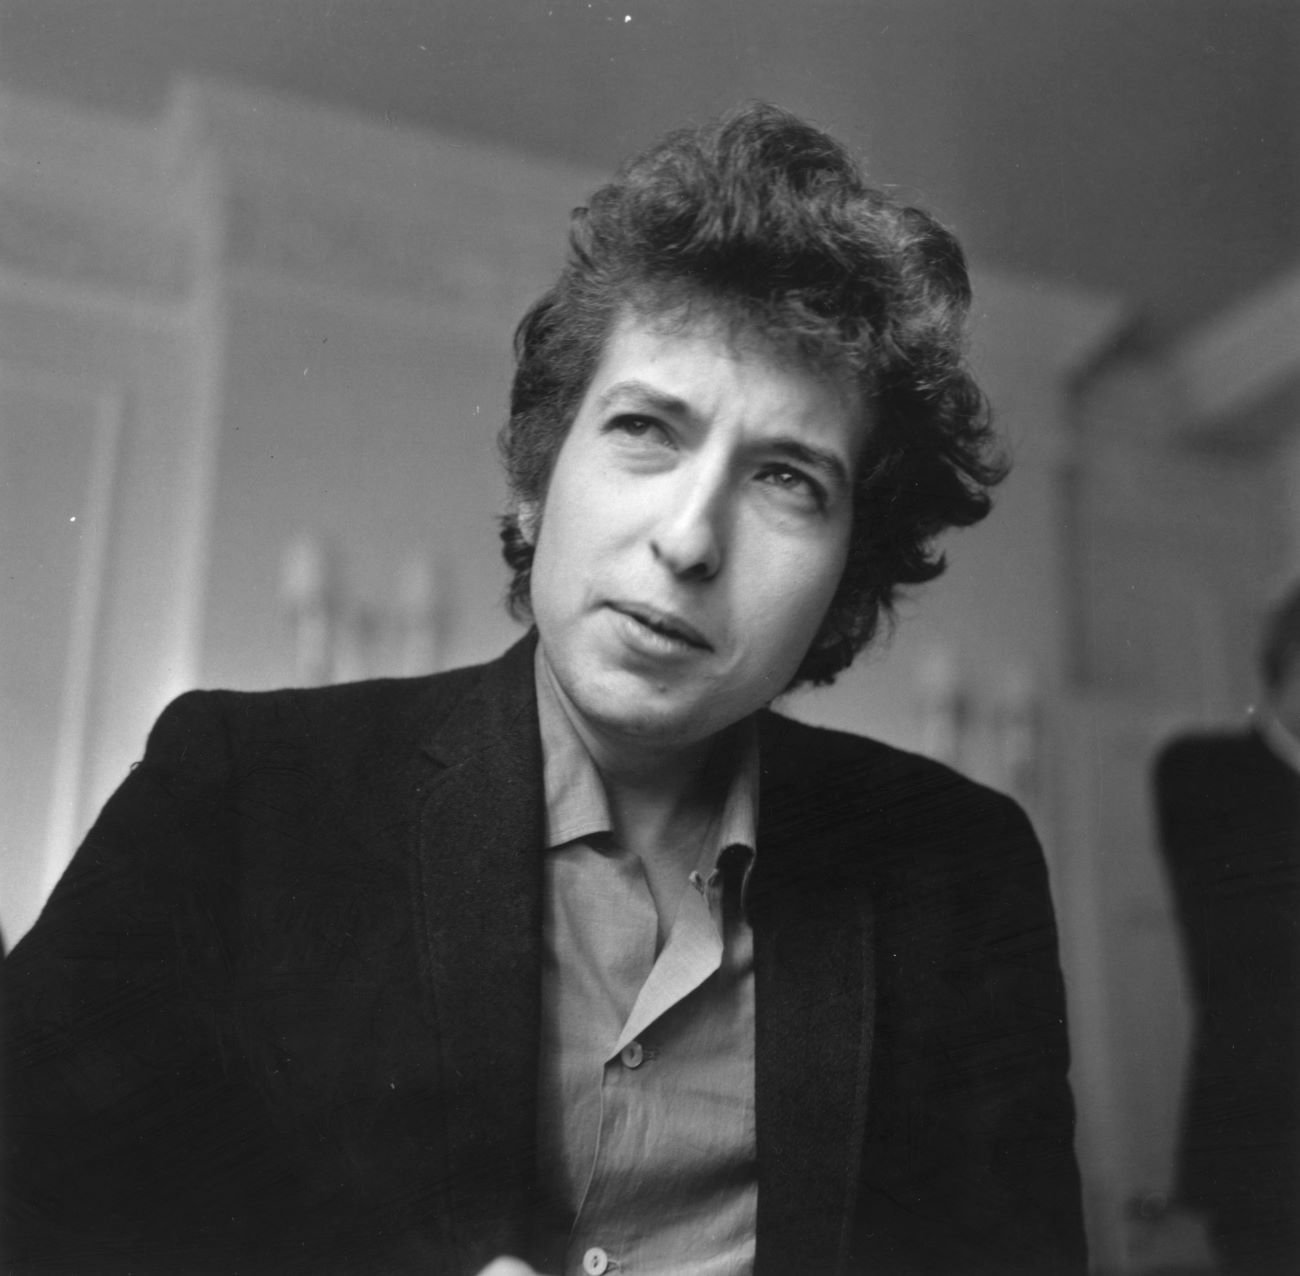 A black and white picture of Bob Dylan wearing a jacket.